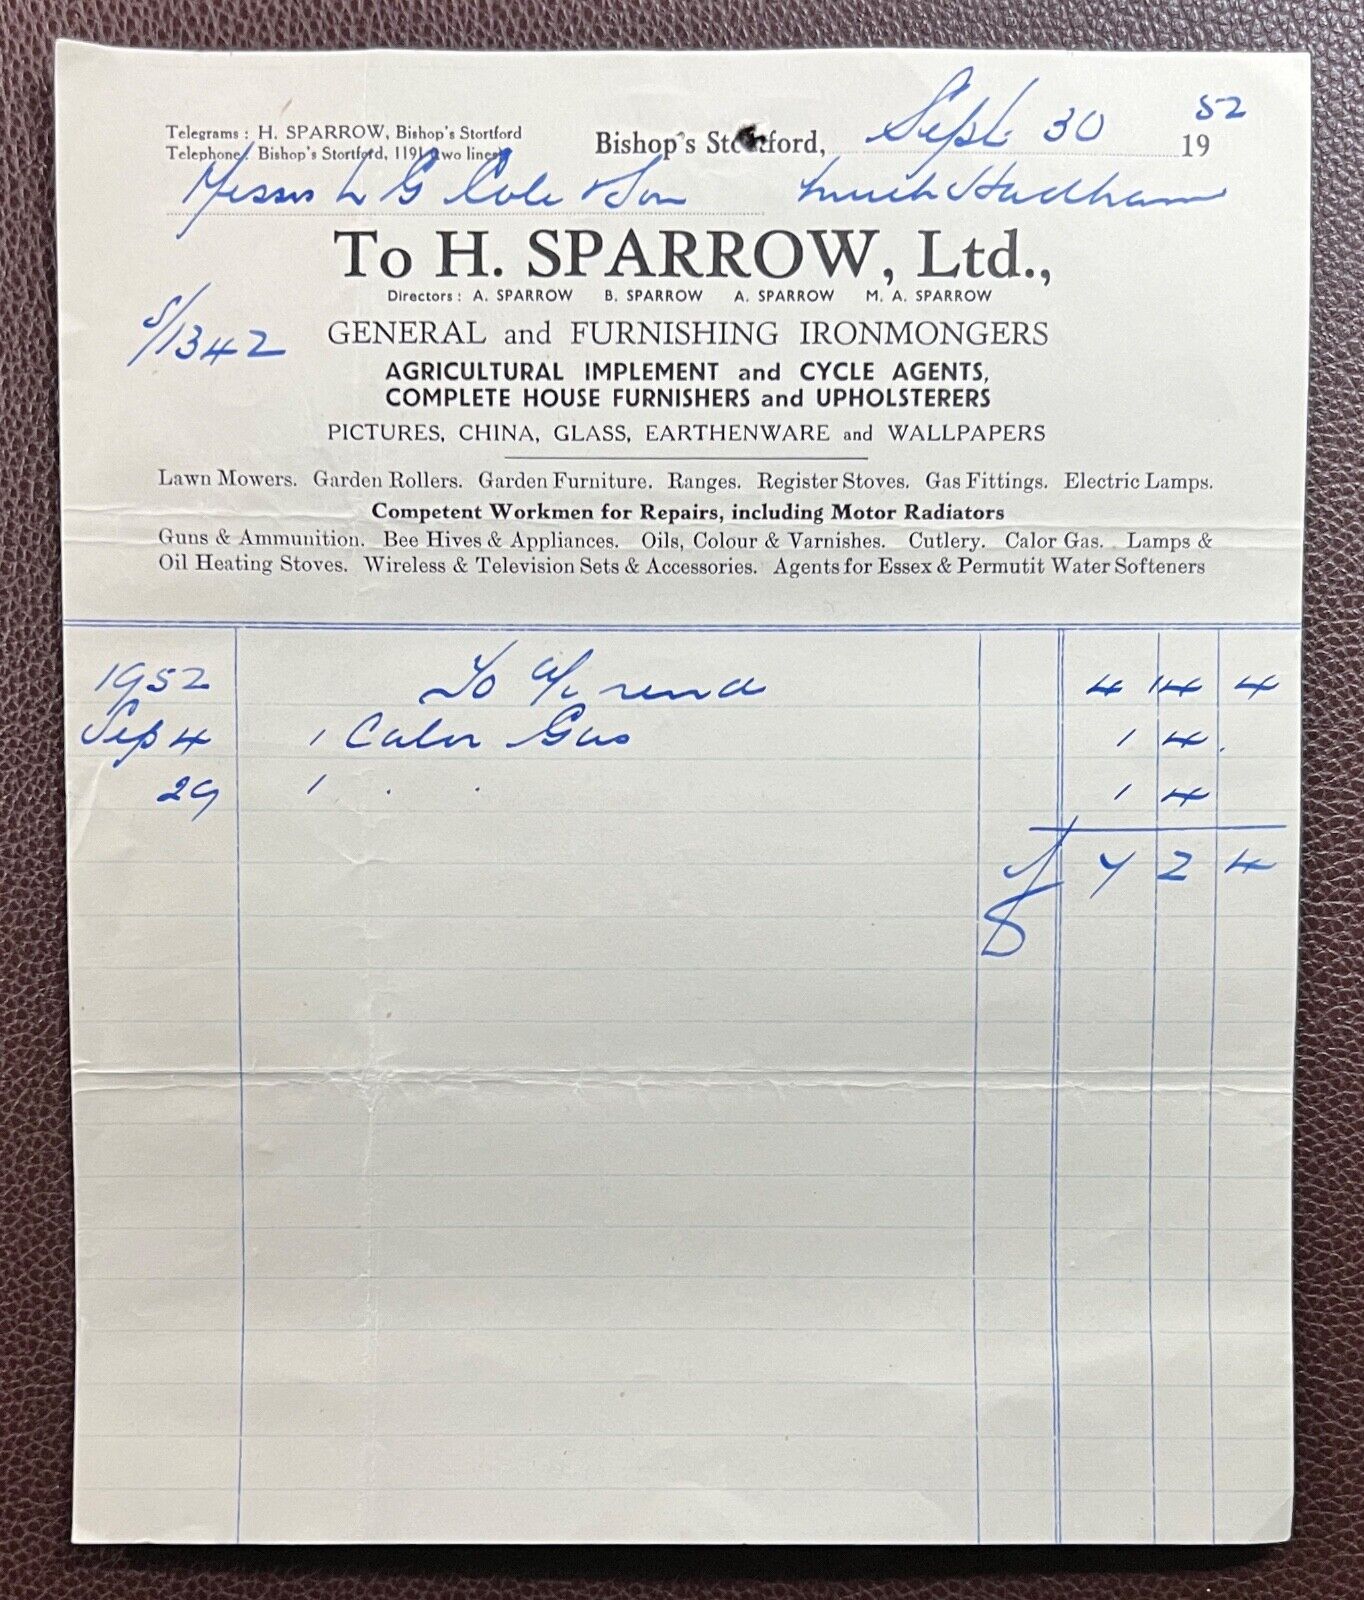 1952 H. Sparrow Ltd, Ironmongers & Cycle Agents, Bishops Stortford Invoice